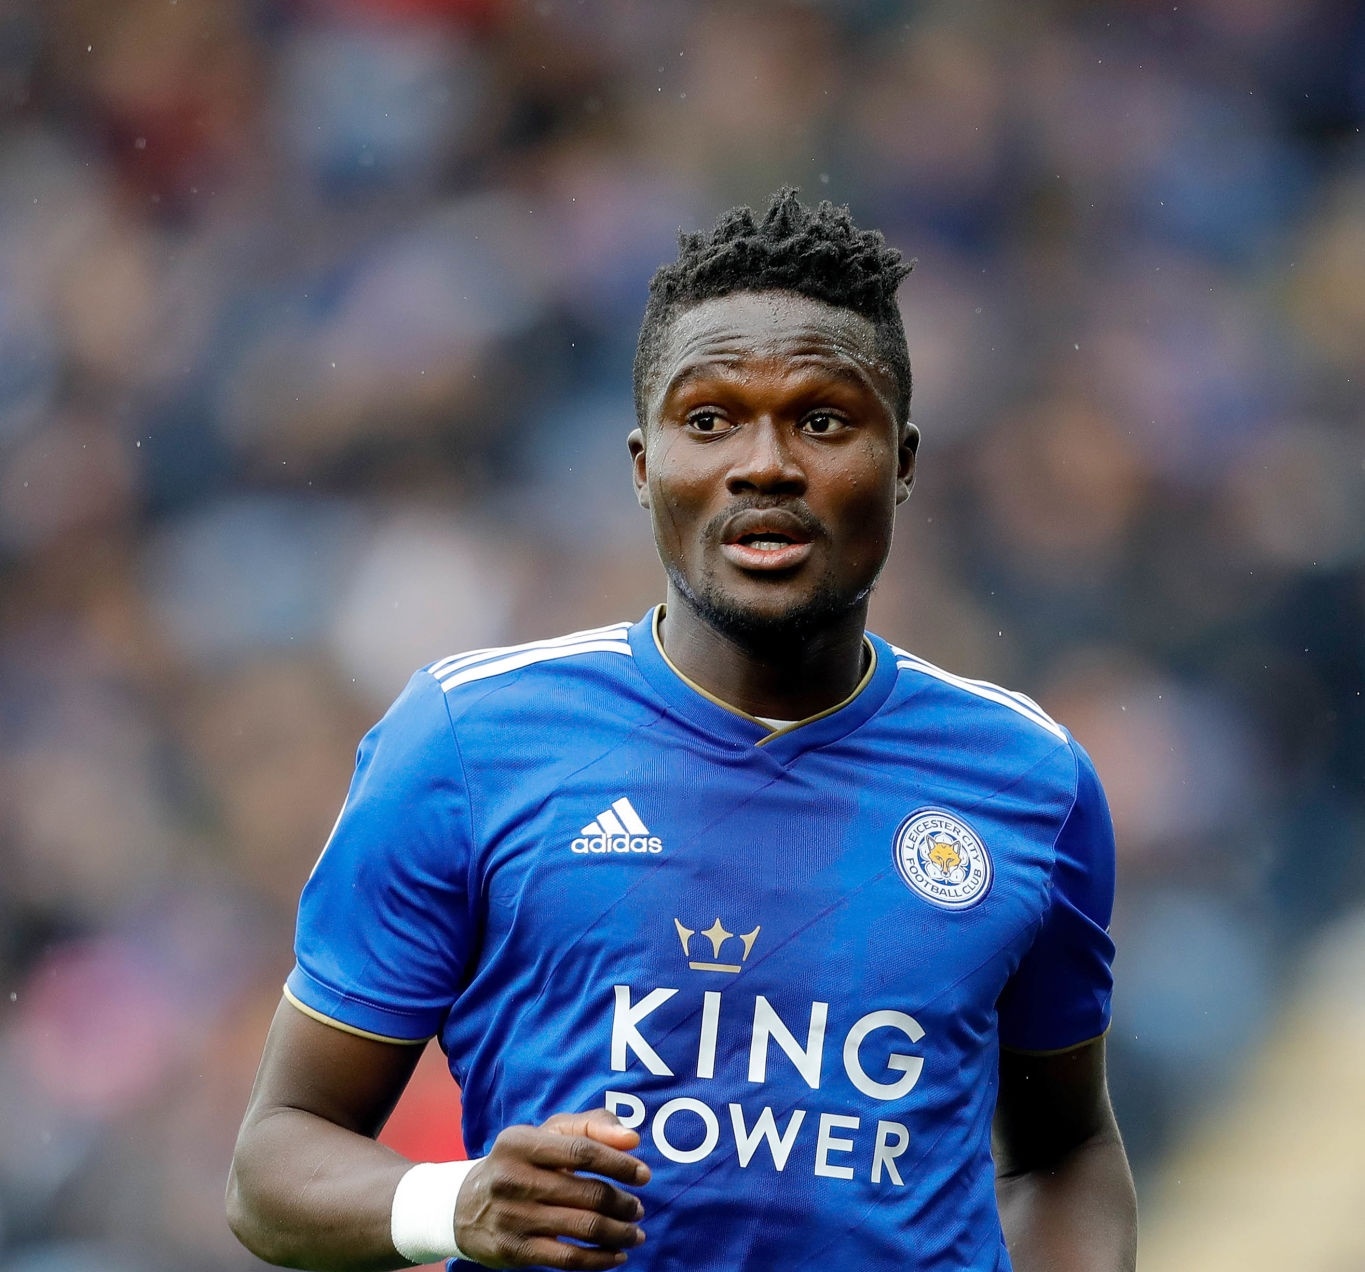 Leicester boss Brendan Rodgers pleased with Daniel Amartey’s performance this season